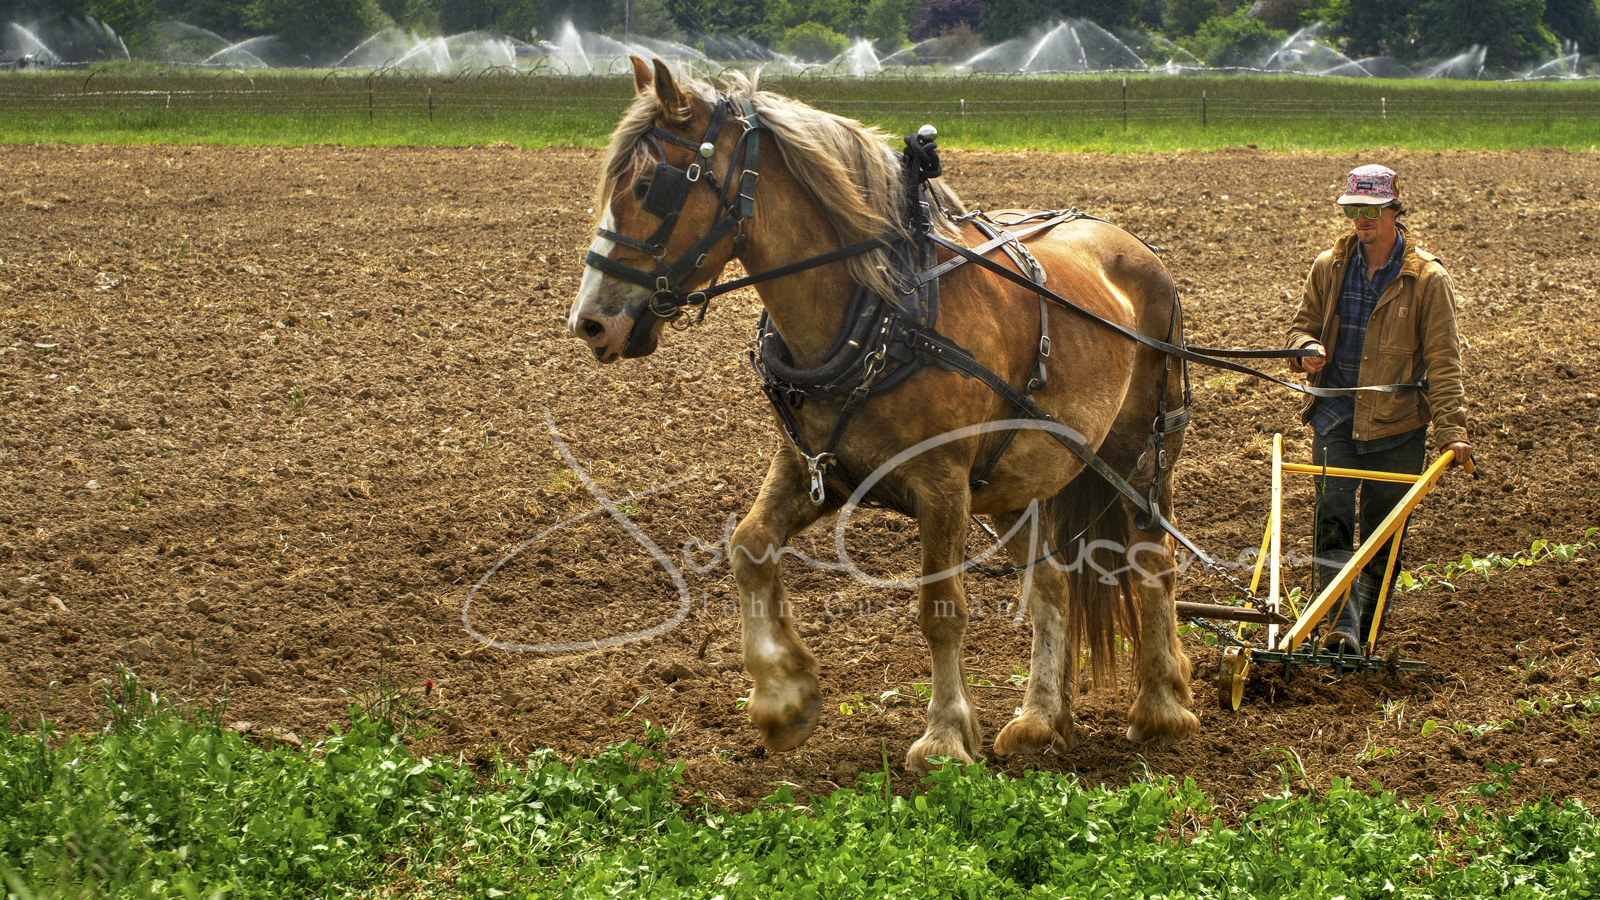 plowing_tonemapped